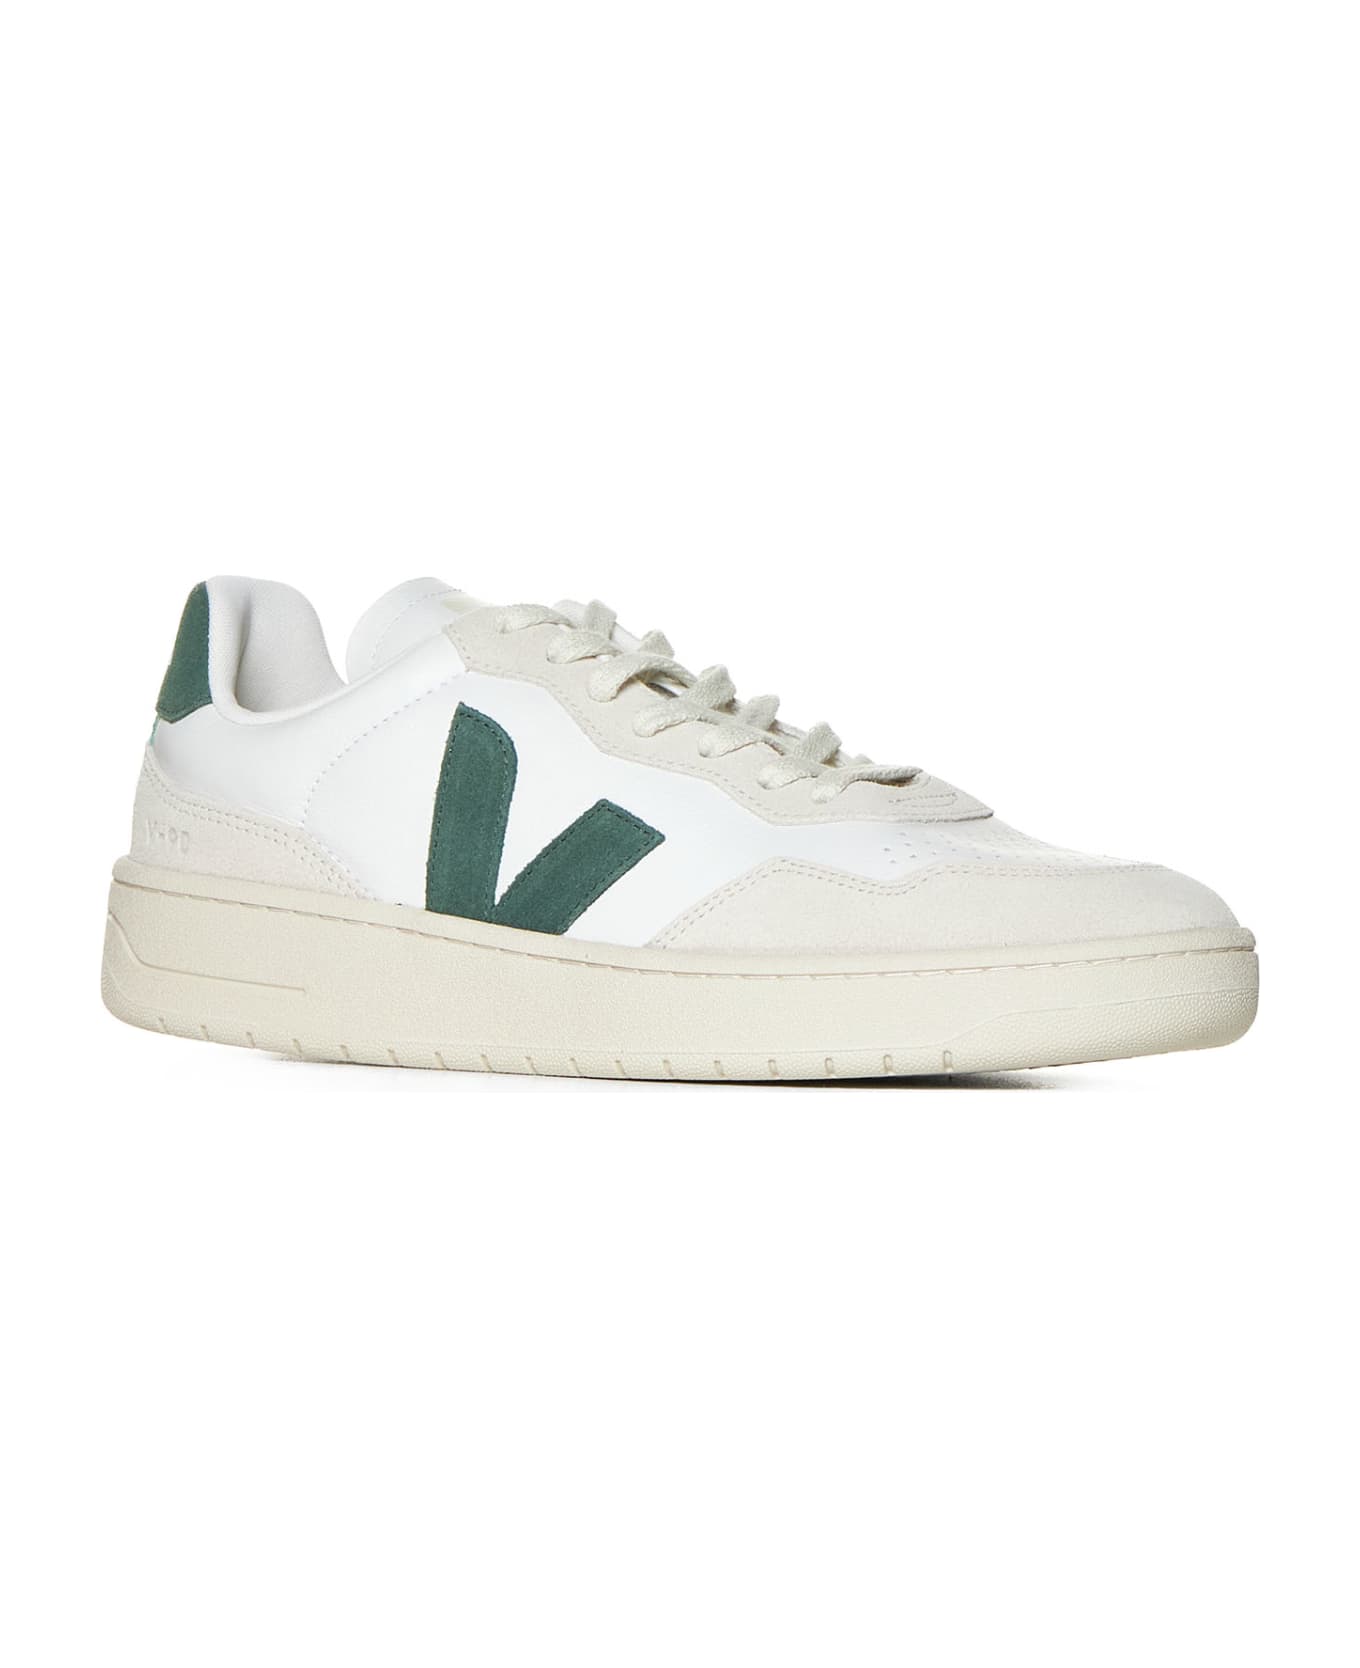 Veja Sneakers - Extra-white_cyprus スニーカー